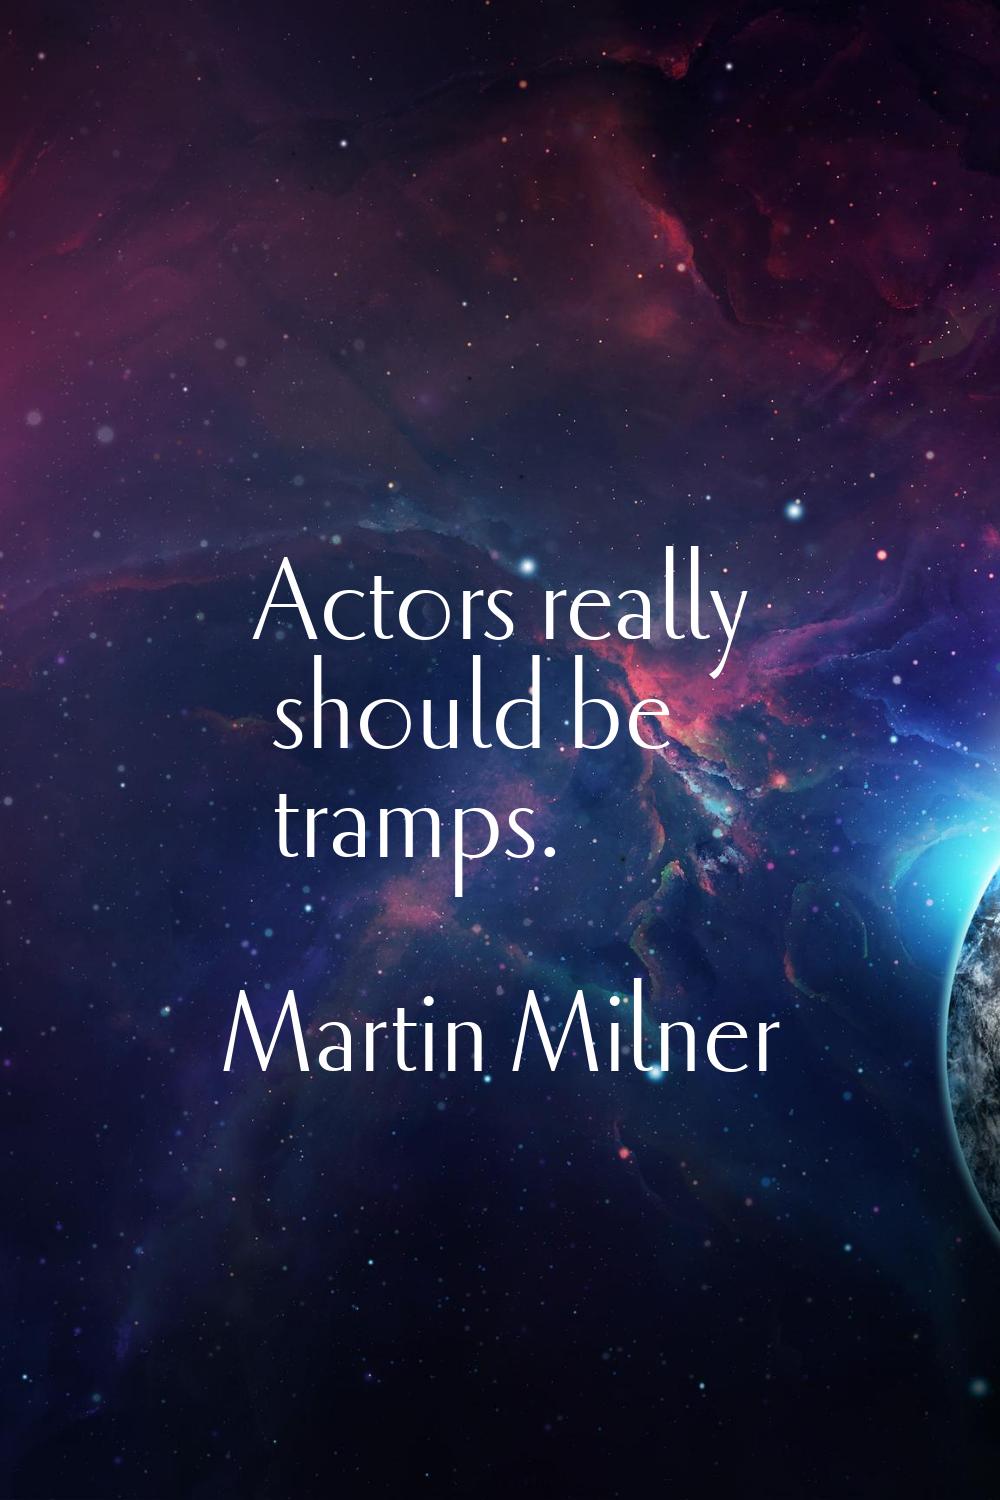 Actors really should be tramps.